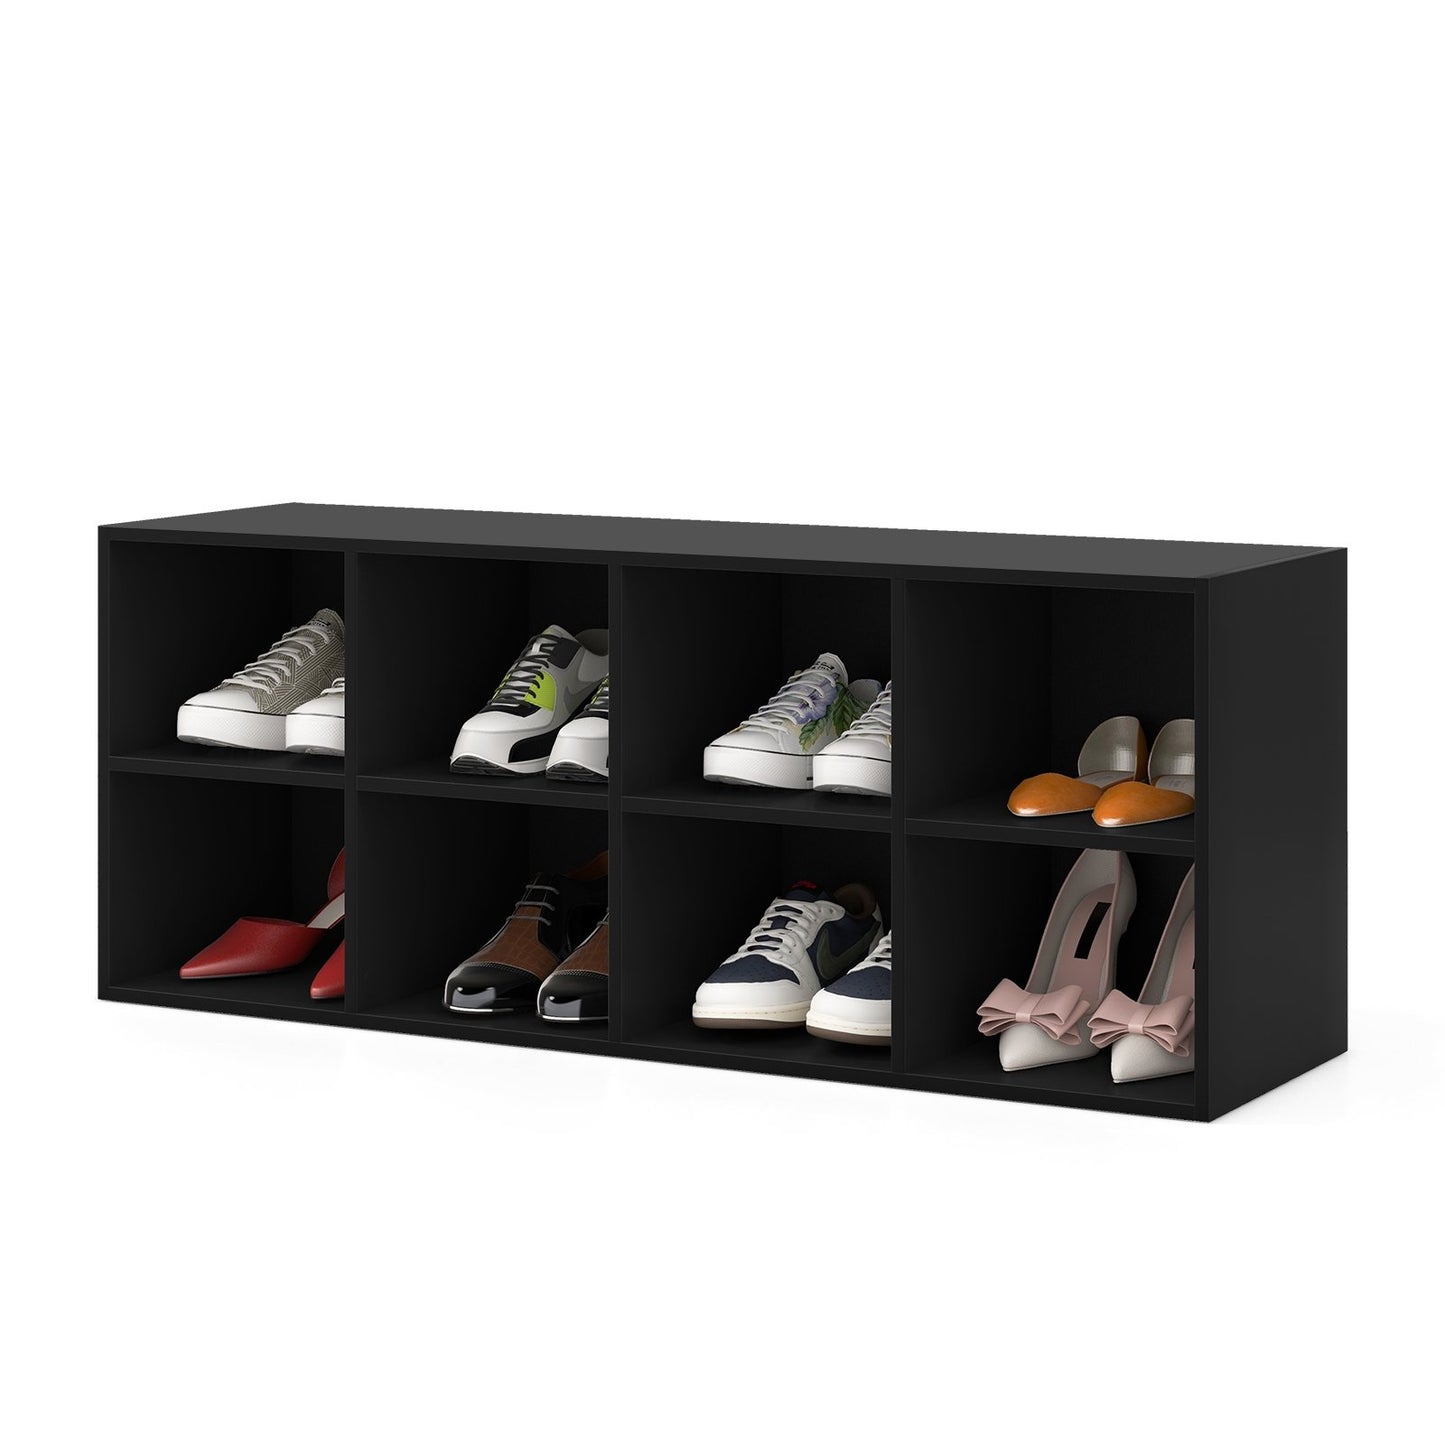 8 Cubbies Shoe Organizer with 500 LBS Weight Capacity, Black